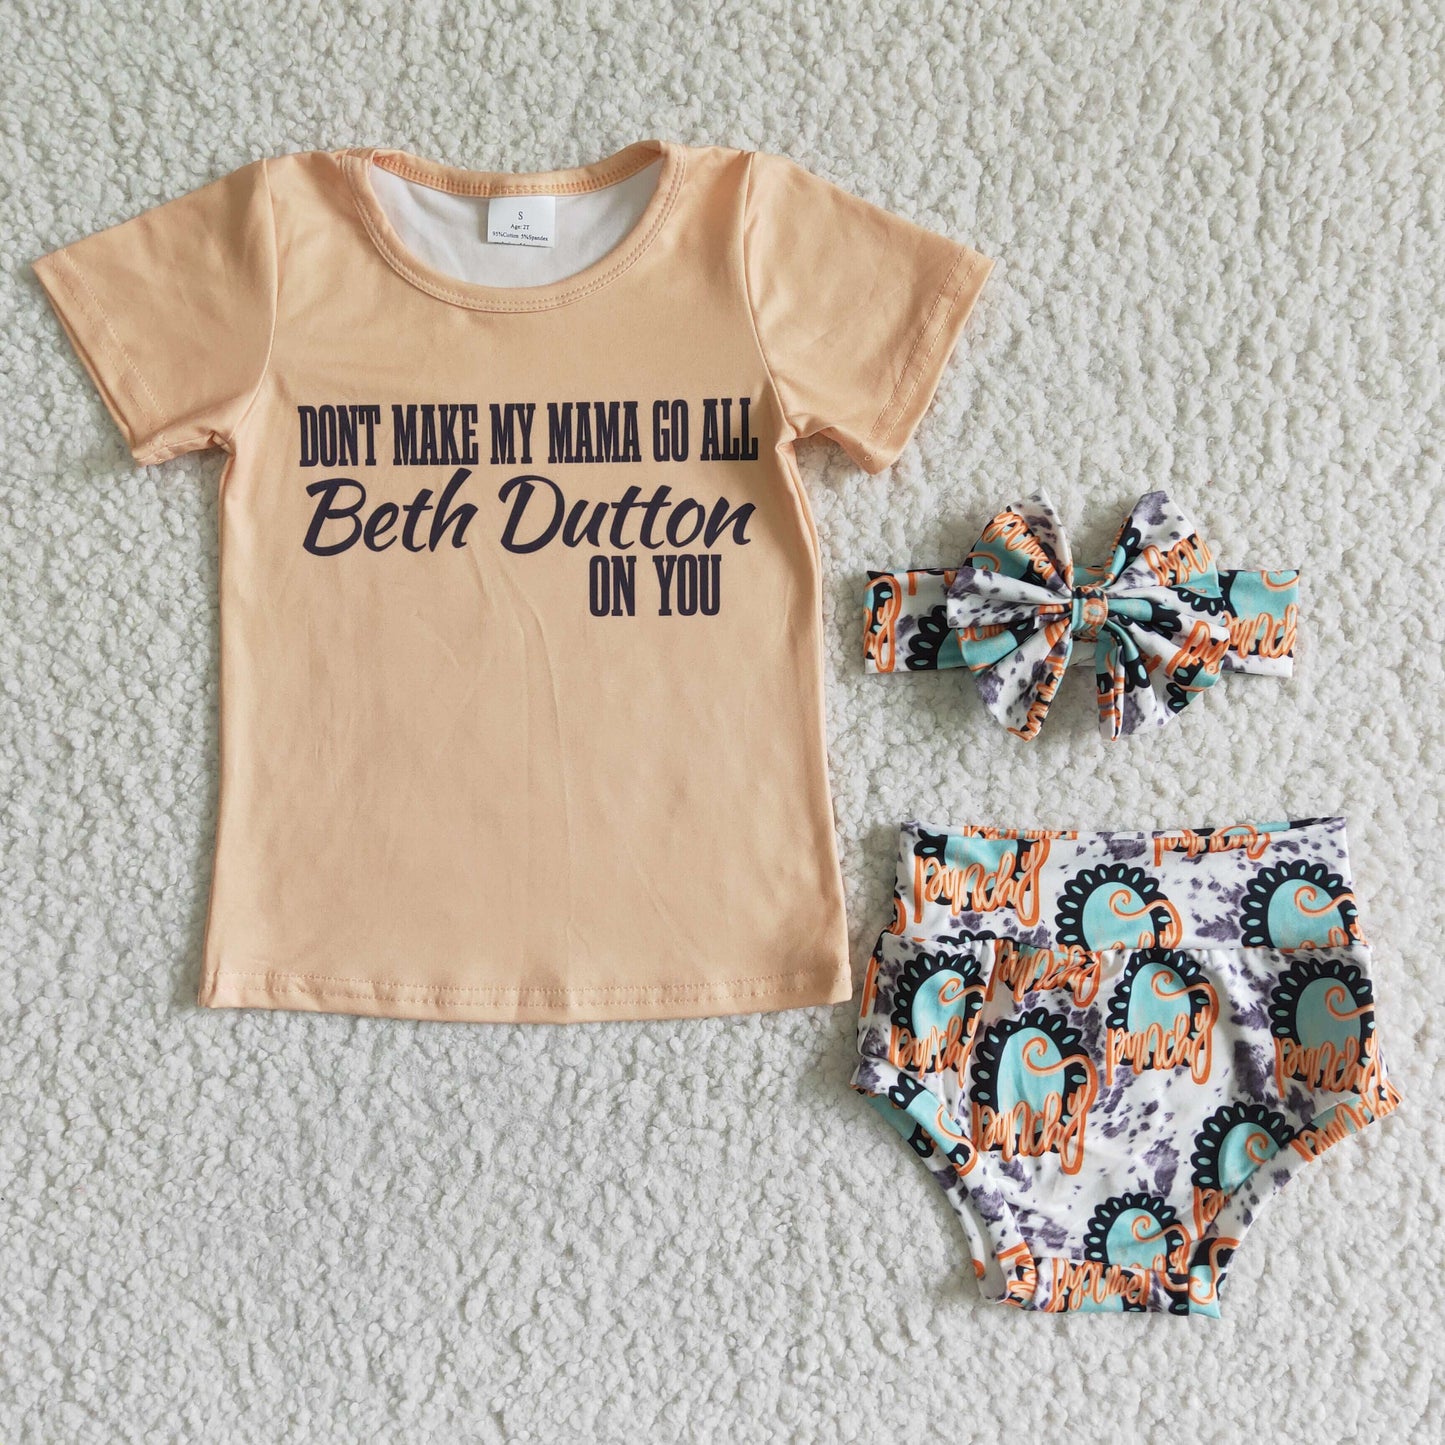 (Promotion)Don't make my mama go all beth dutton on you bummie outfits GBO0006